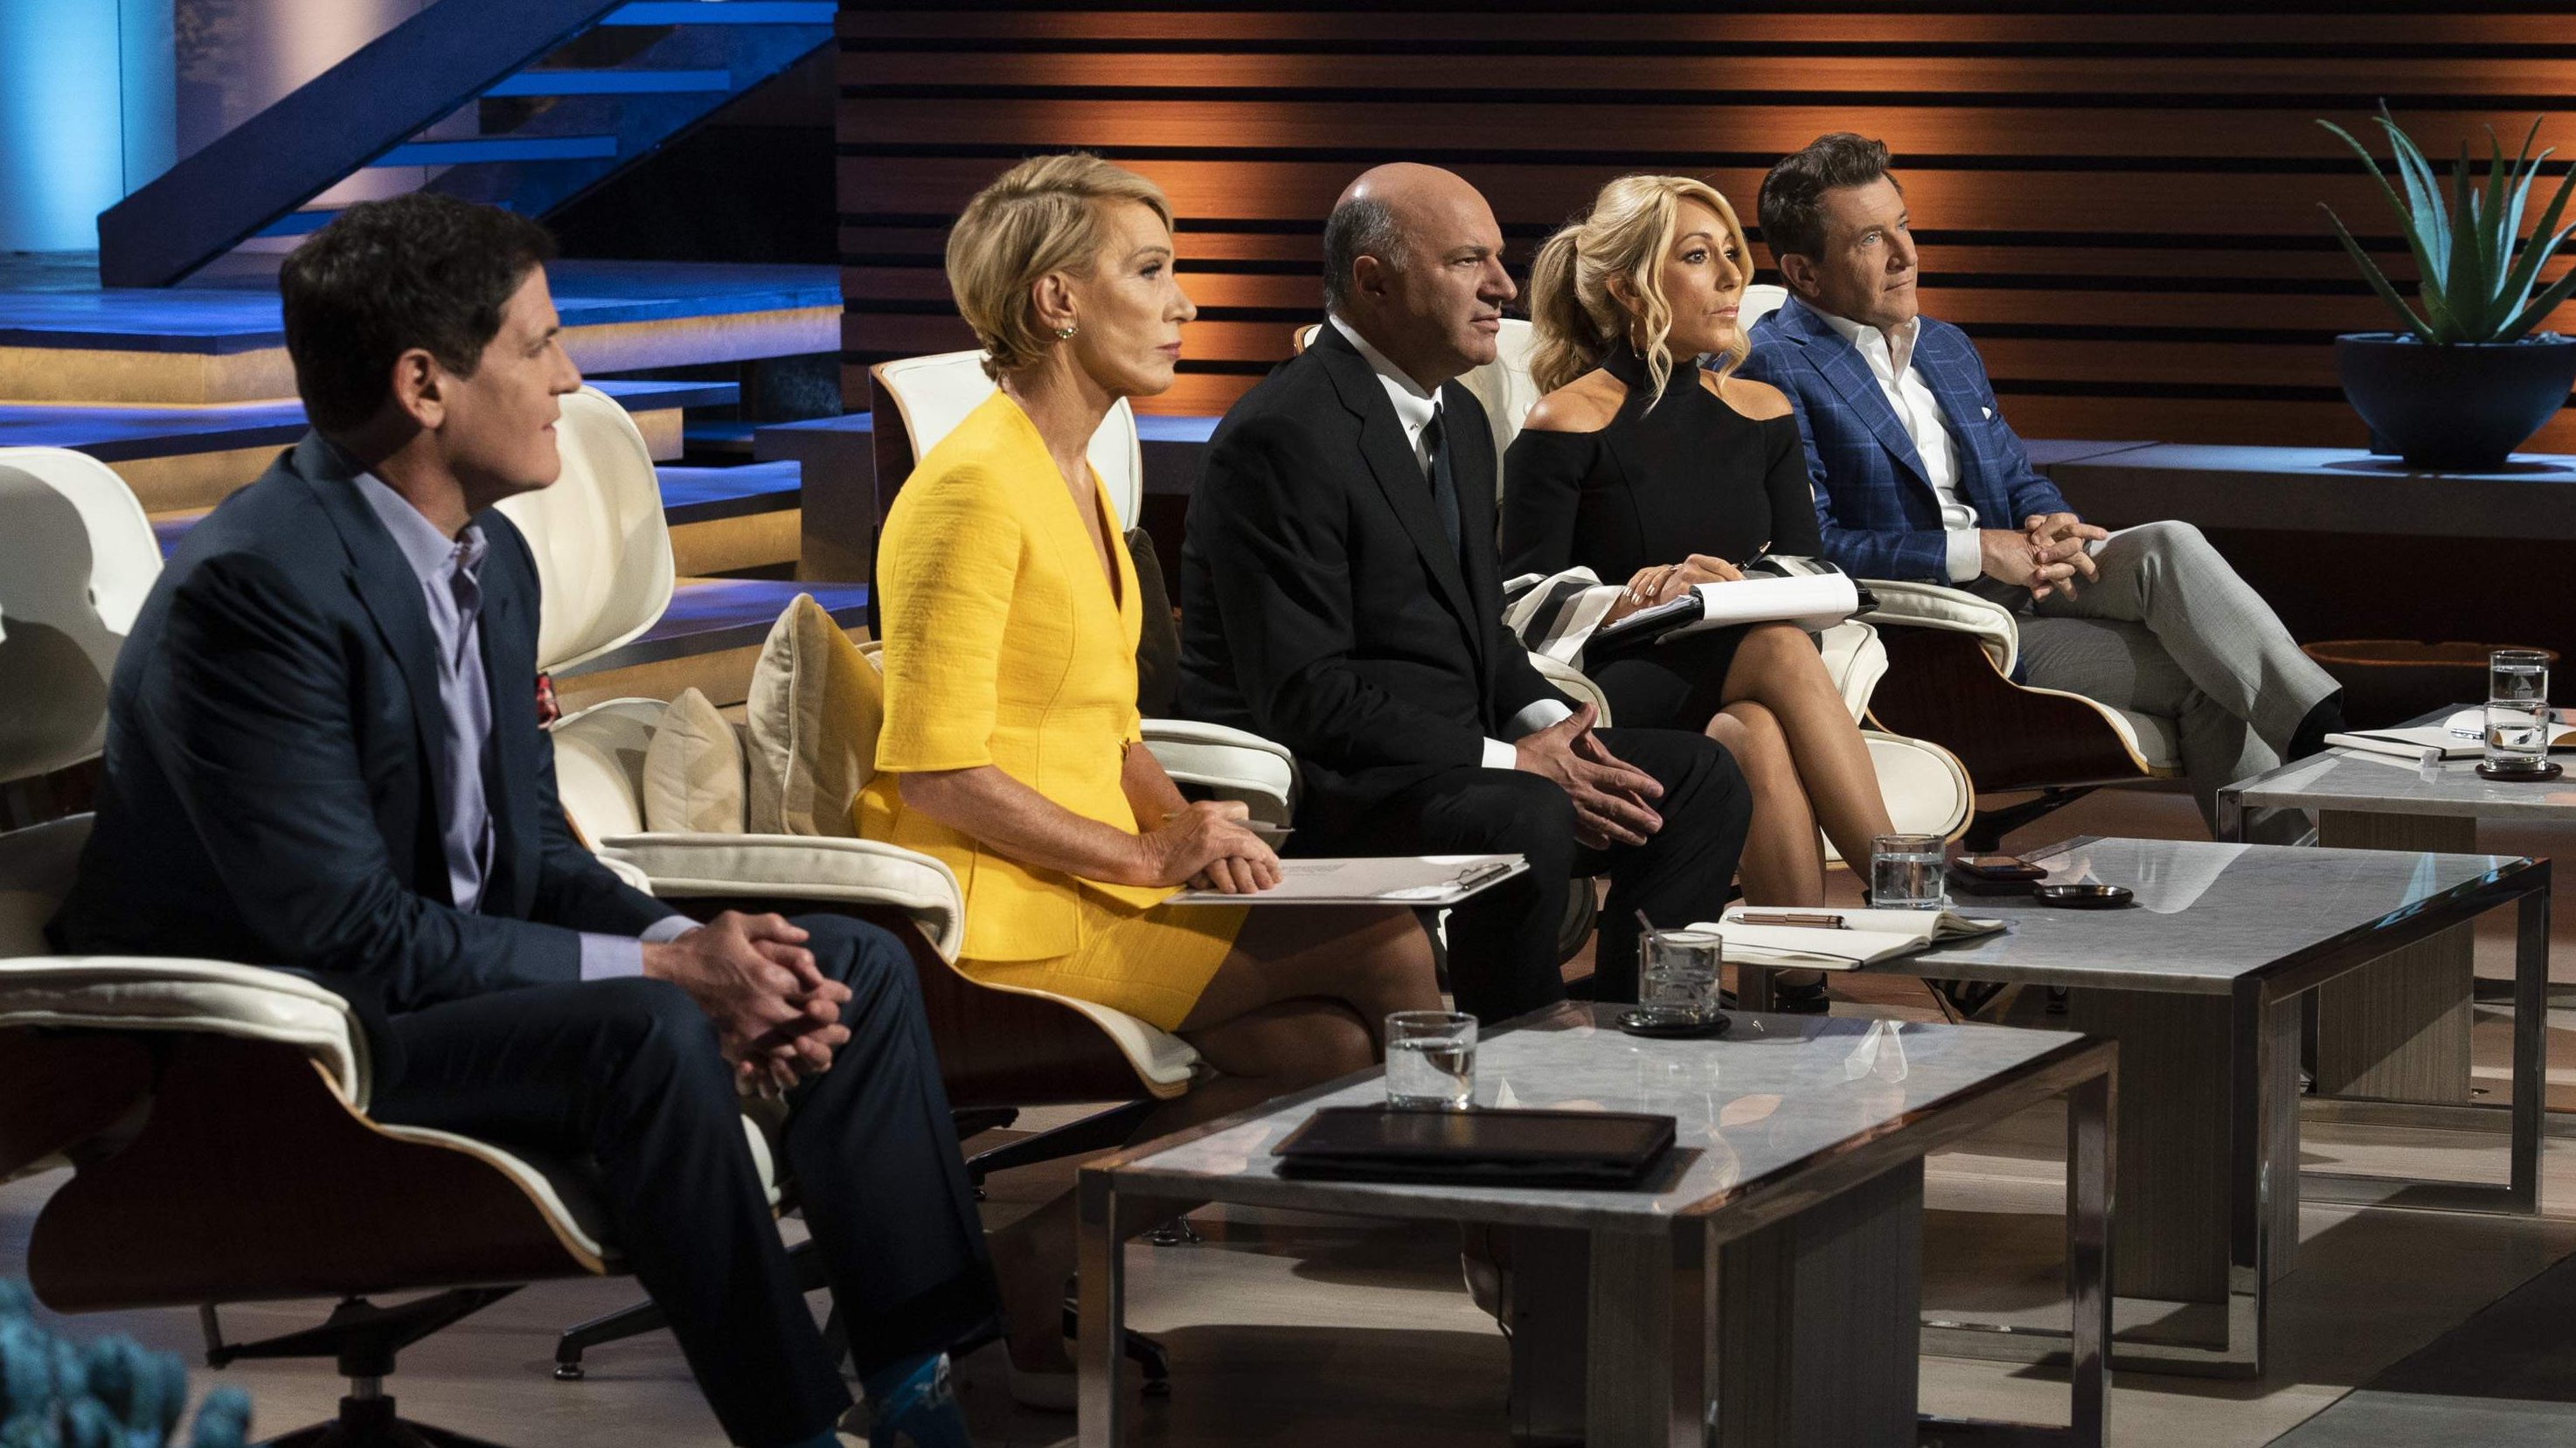 Easy Treezy on ‘Shark Tank’ 5 Fast Facts You Need to Know